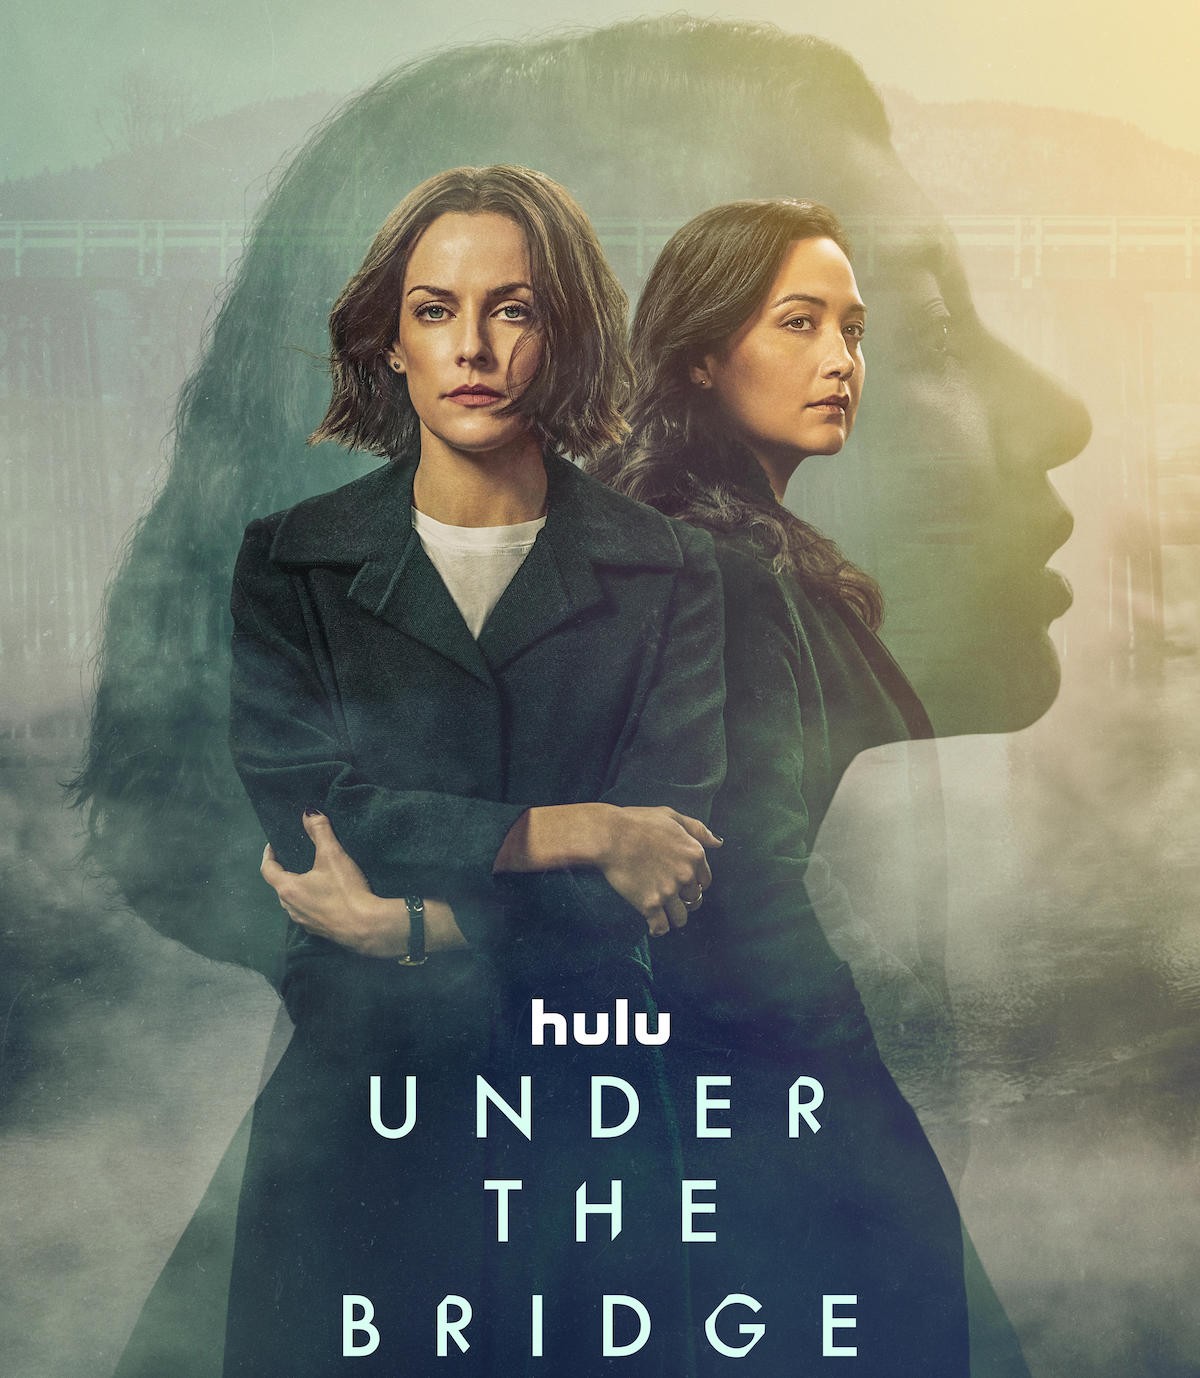 <p class="">This new TV show, based on Rebecca Godfrey's book of the same name, tells the true story of Reena Virk, a teen who left for a high school party and never came home. <strong><a href="https://www.brit.co/riley-keough-dakota-johnson/">Riley Keough</a></strong> stars as Rebecca, who partners up with a police officer (Lily Gladstone) to figure out why Reena disappeared — and ends up discovering just how murderous the local teens can be.</p><p><i>Under the Bridge hits Hulu April 17 and stars </i><em>Lily Gladstone, Riley Keough, Vritika Gupta, Chloe Guidry, Javon “Wanna” Walton, Izzy G., Aiyana Goodfellow, Ezra Faroque Khan.</em></p>